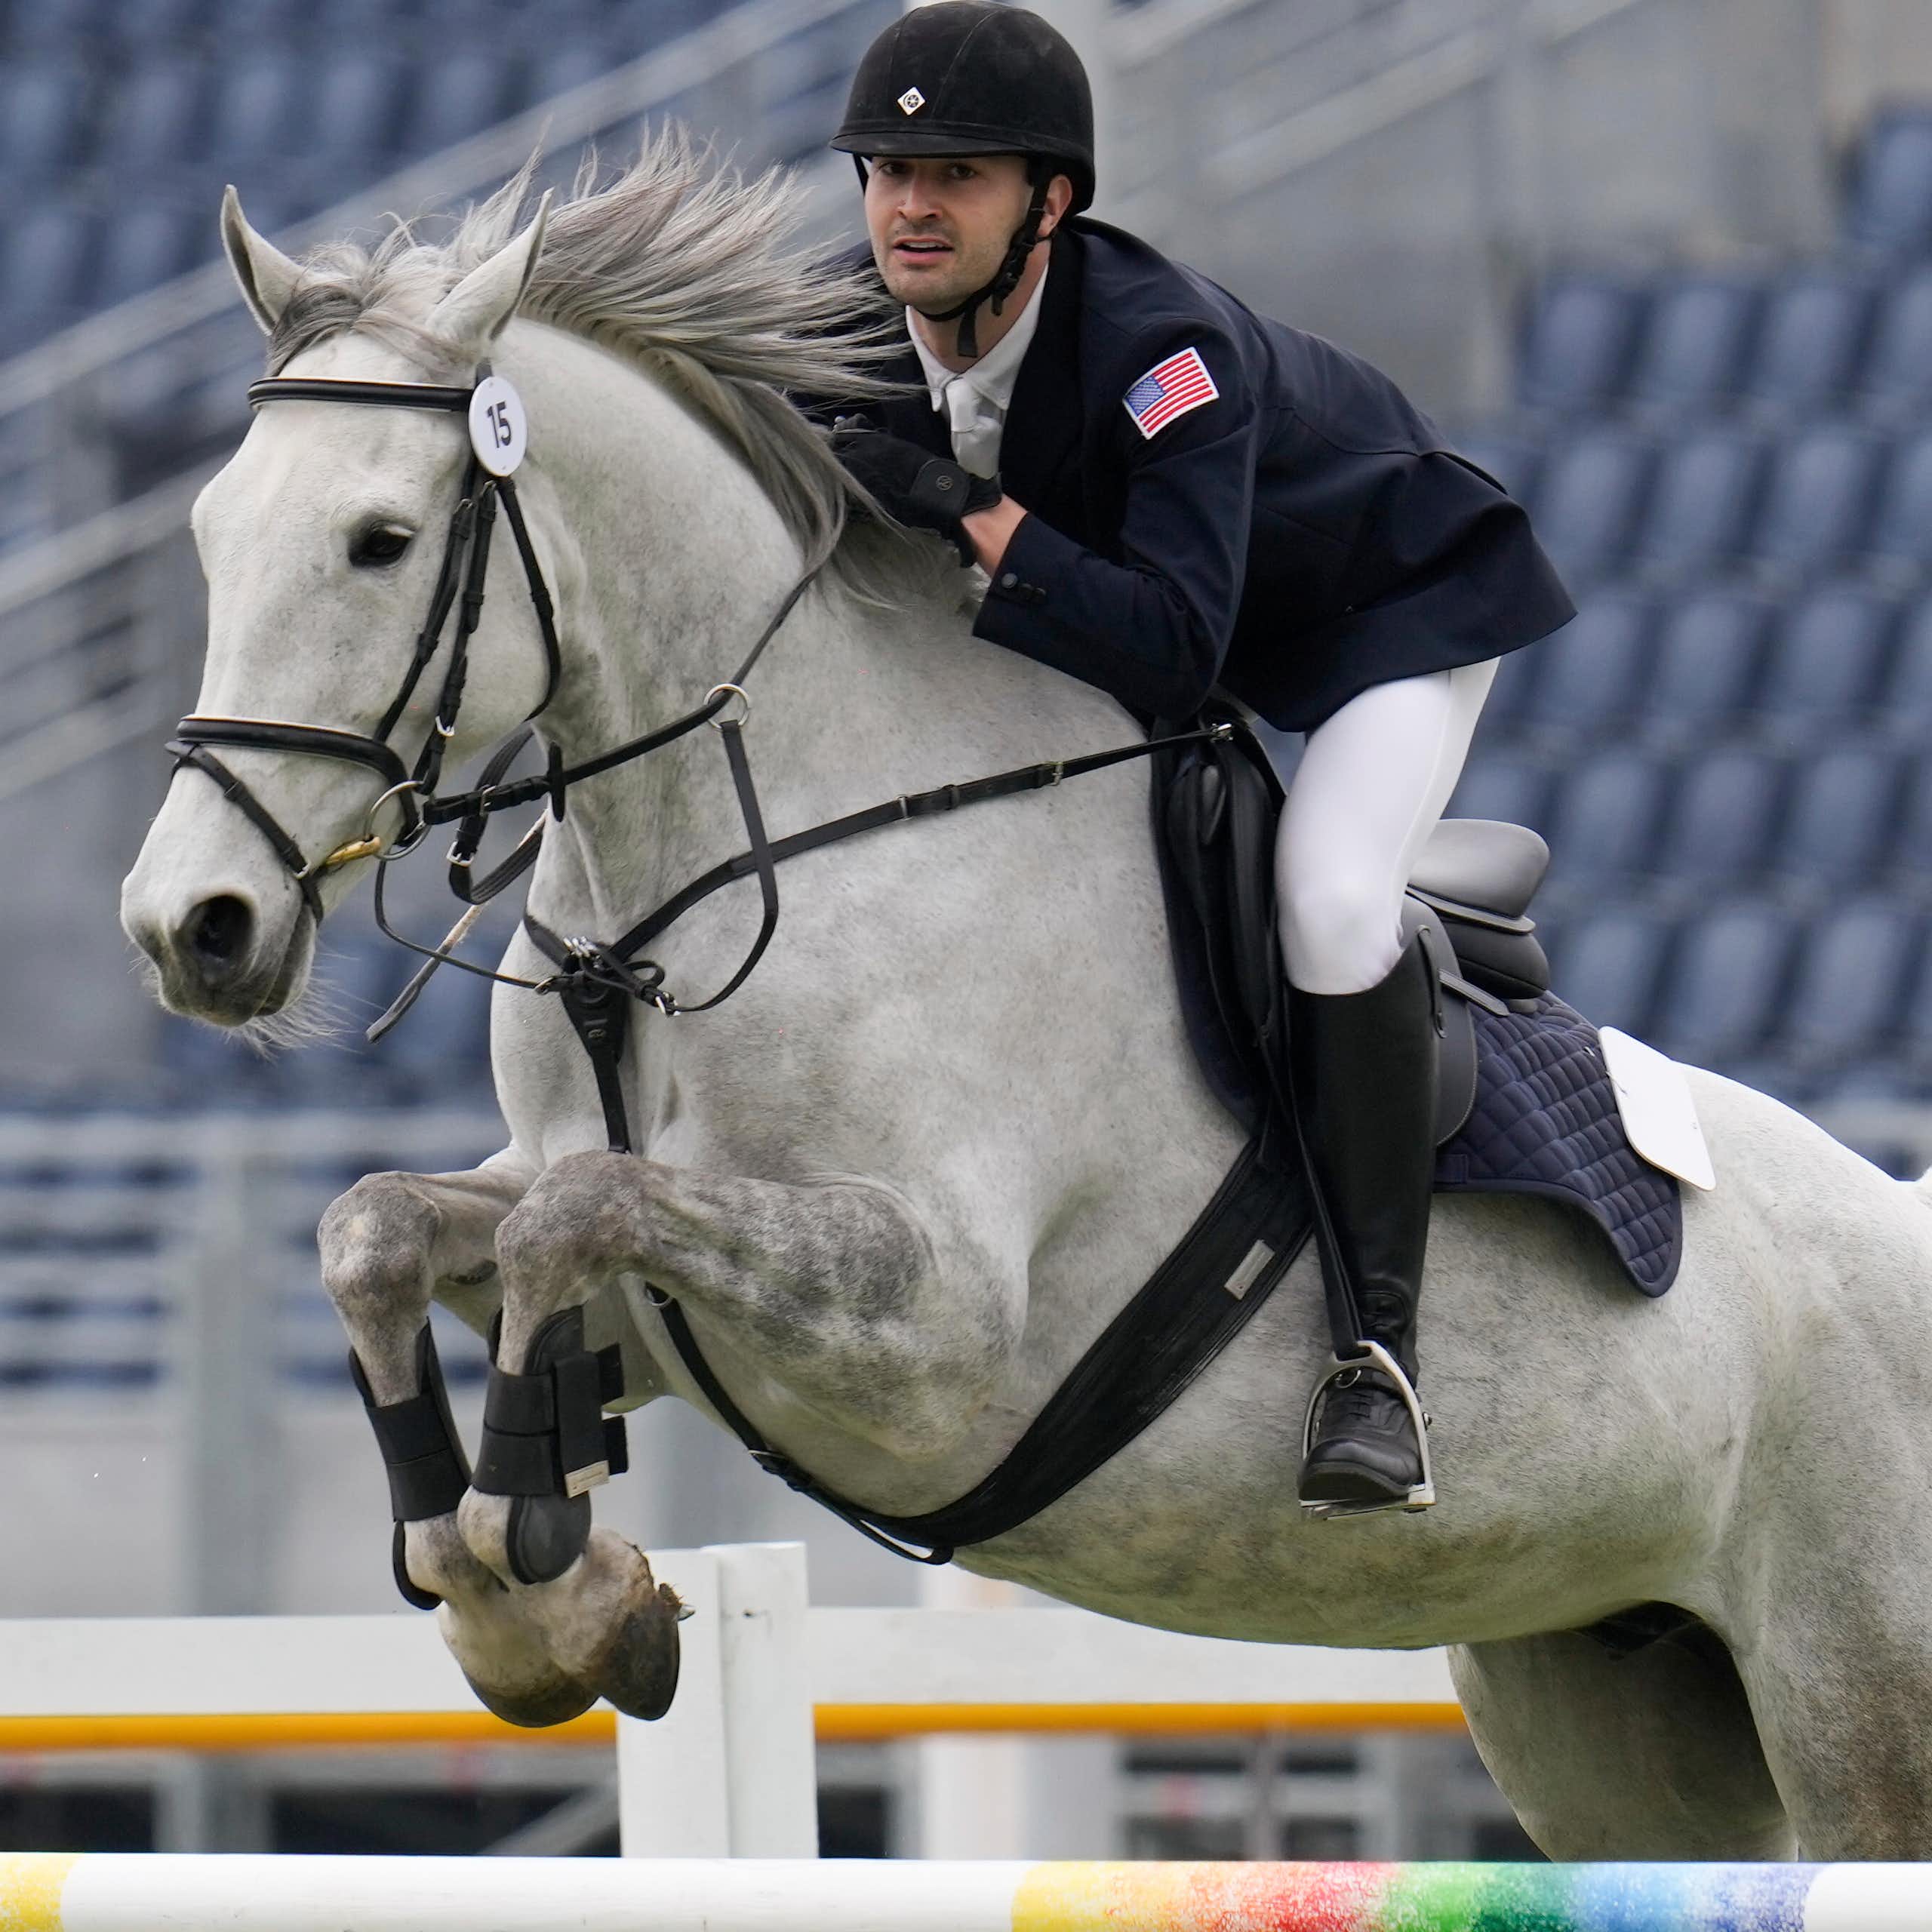 A horseback rider leans forward in the saddle as a gray horse jumps over an obstacle